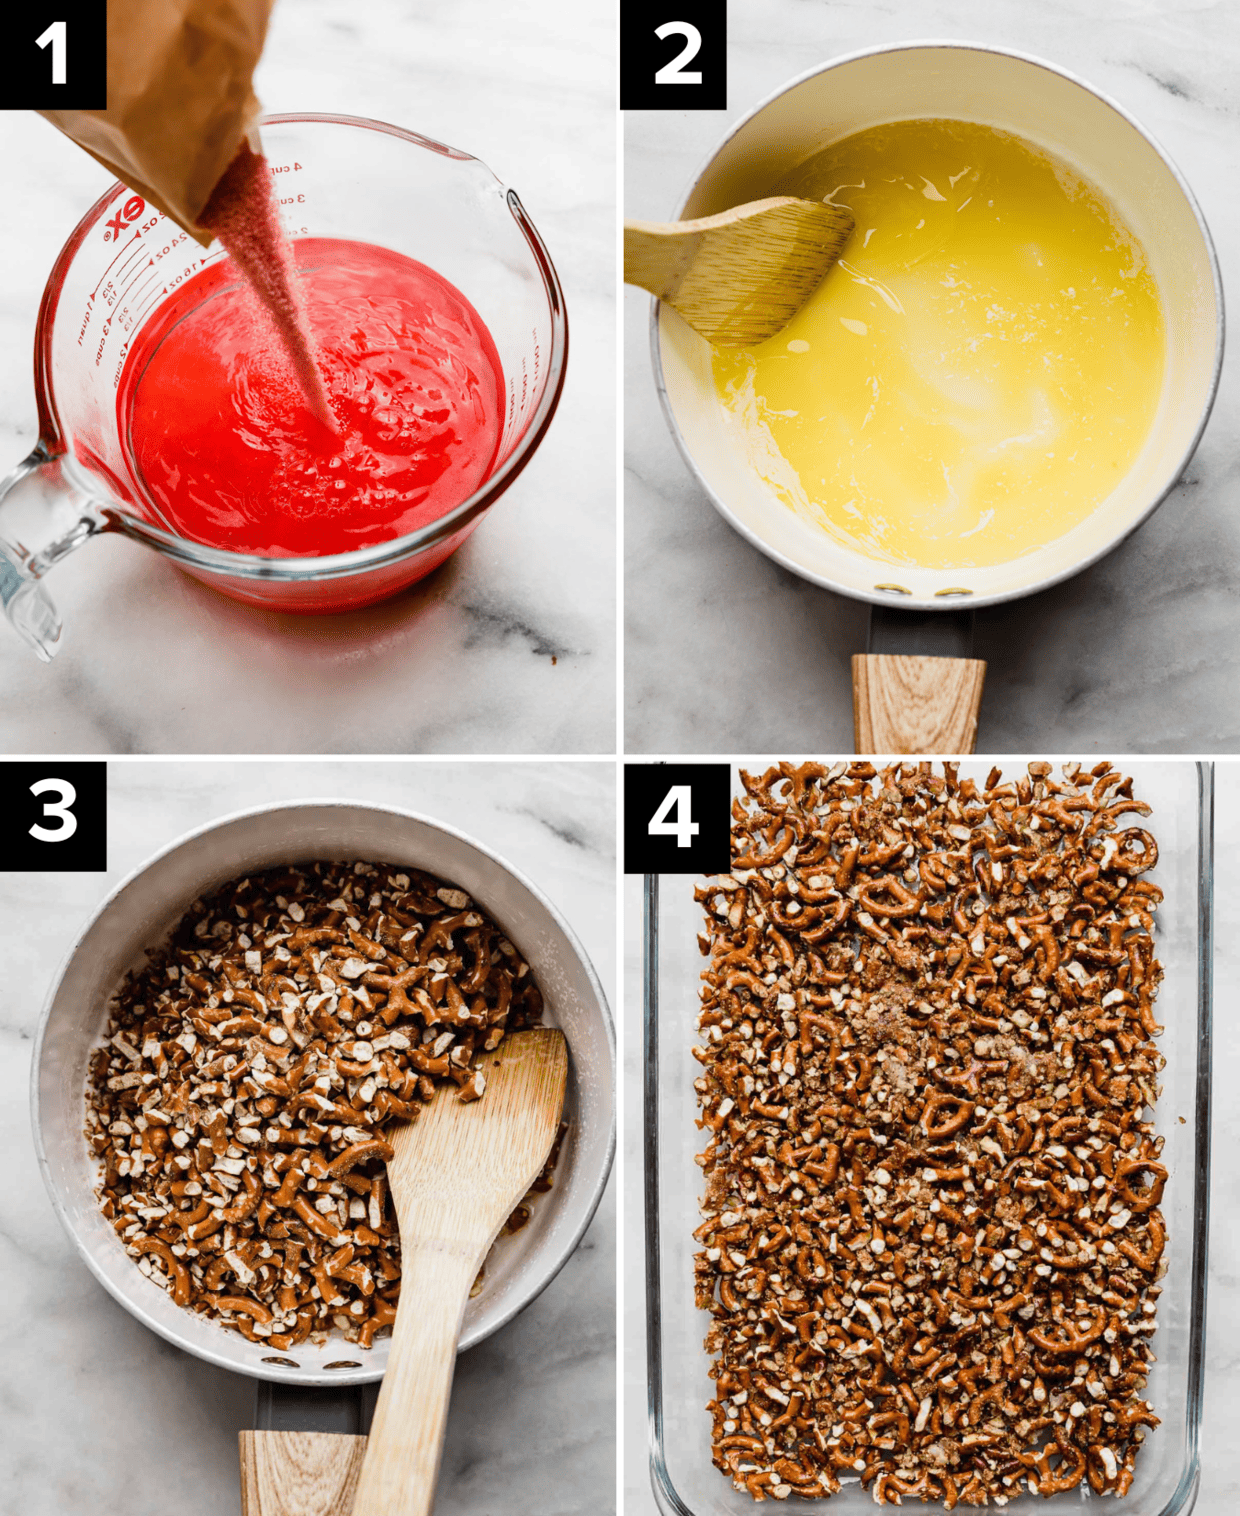 Four photos showing the making of Pretzel Jello Salad, top left is red jello mix being poured into boiling water, top right is butter melted in a white saucepan, bottom left is crushed pretzels in saucepan, bottom right is crushed pretzels along the bottom of a baking dish.